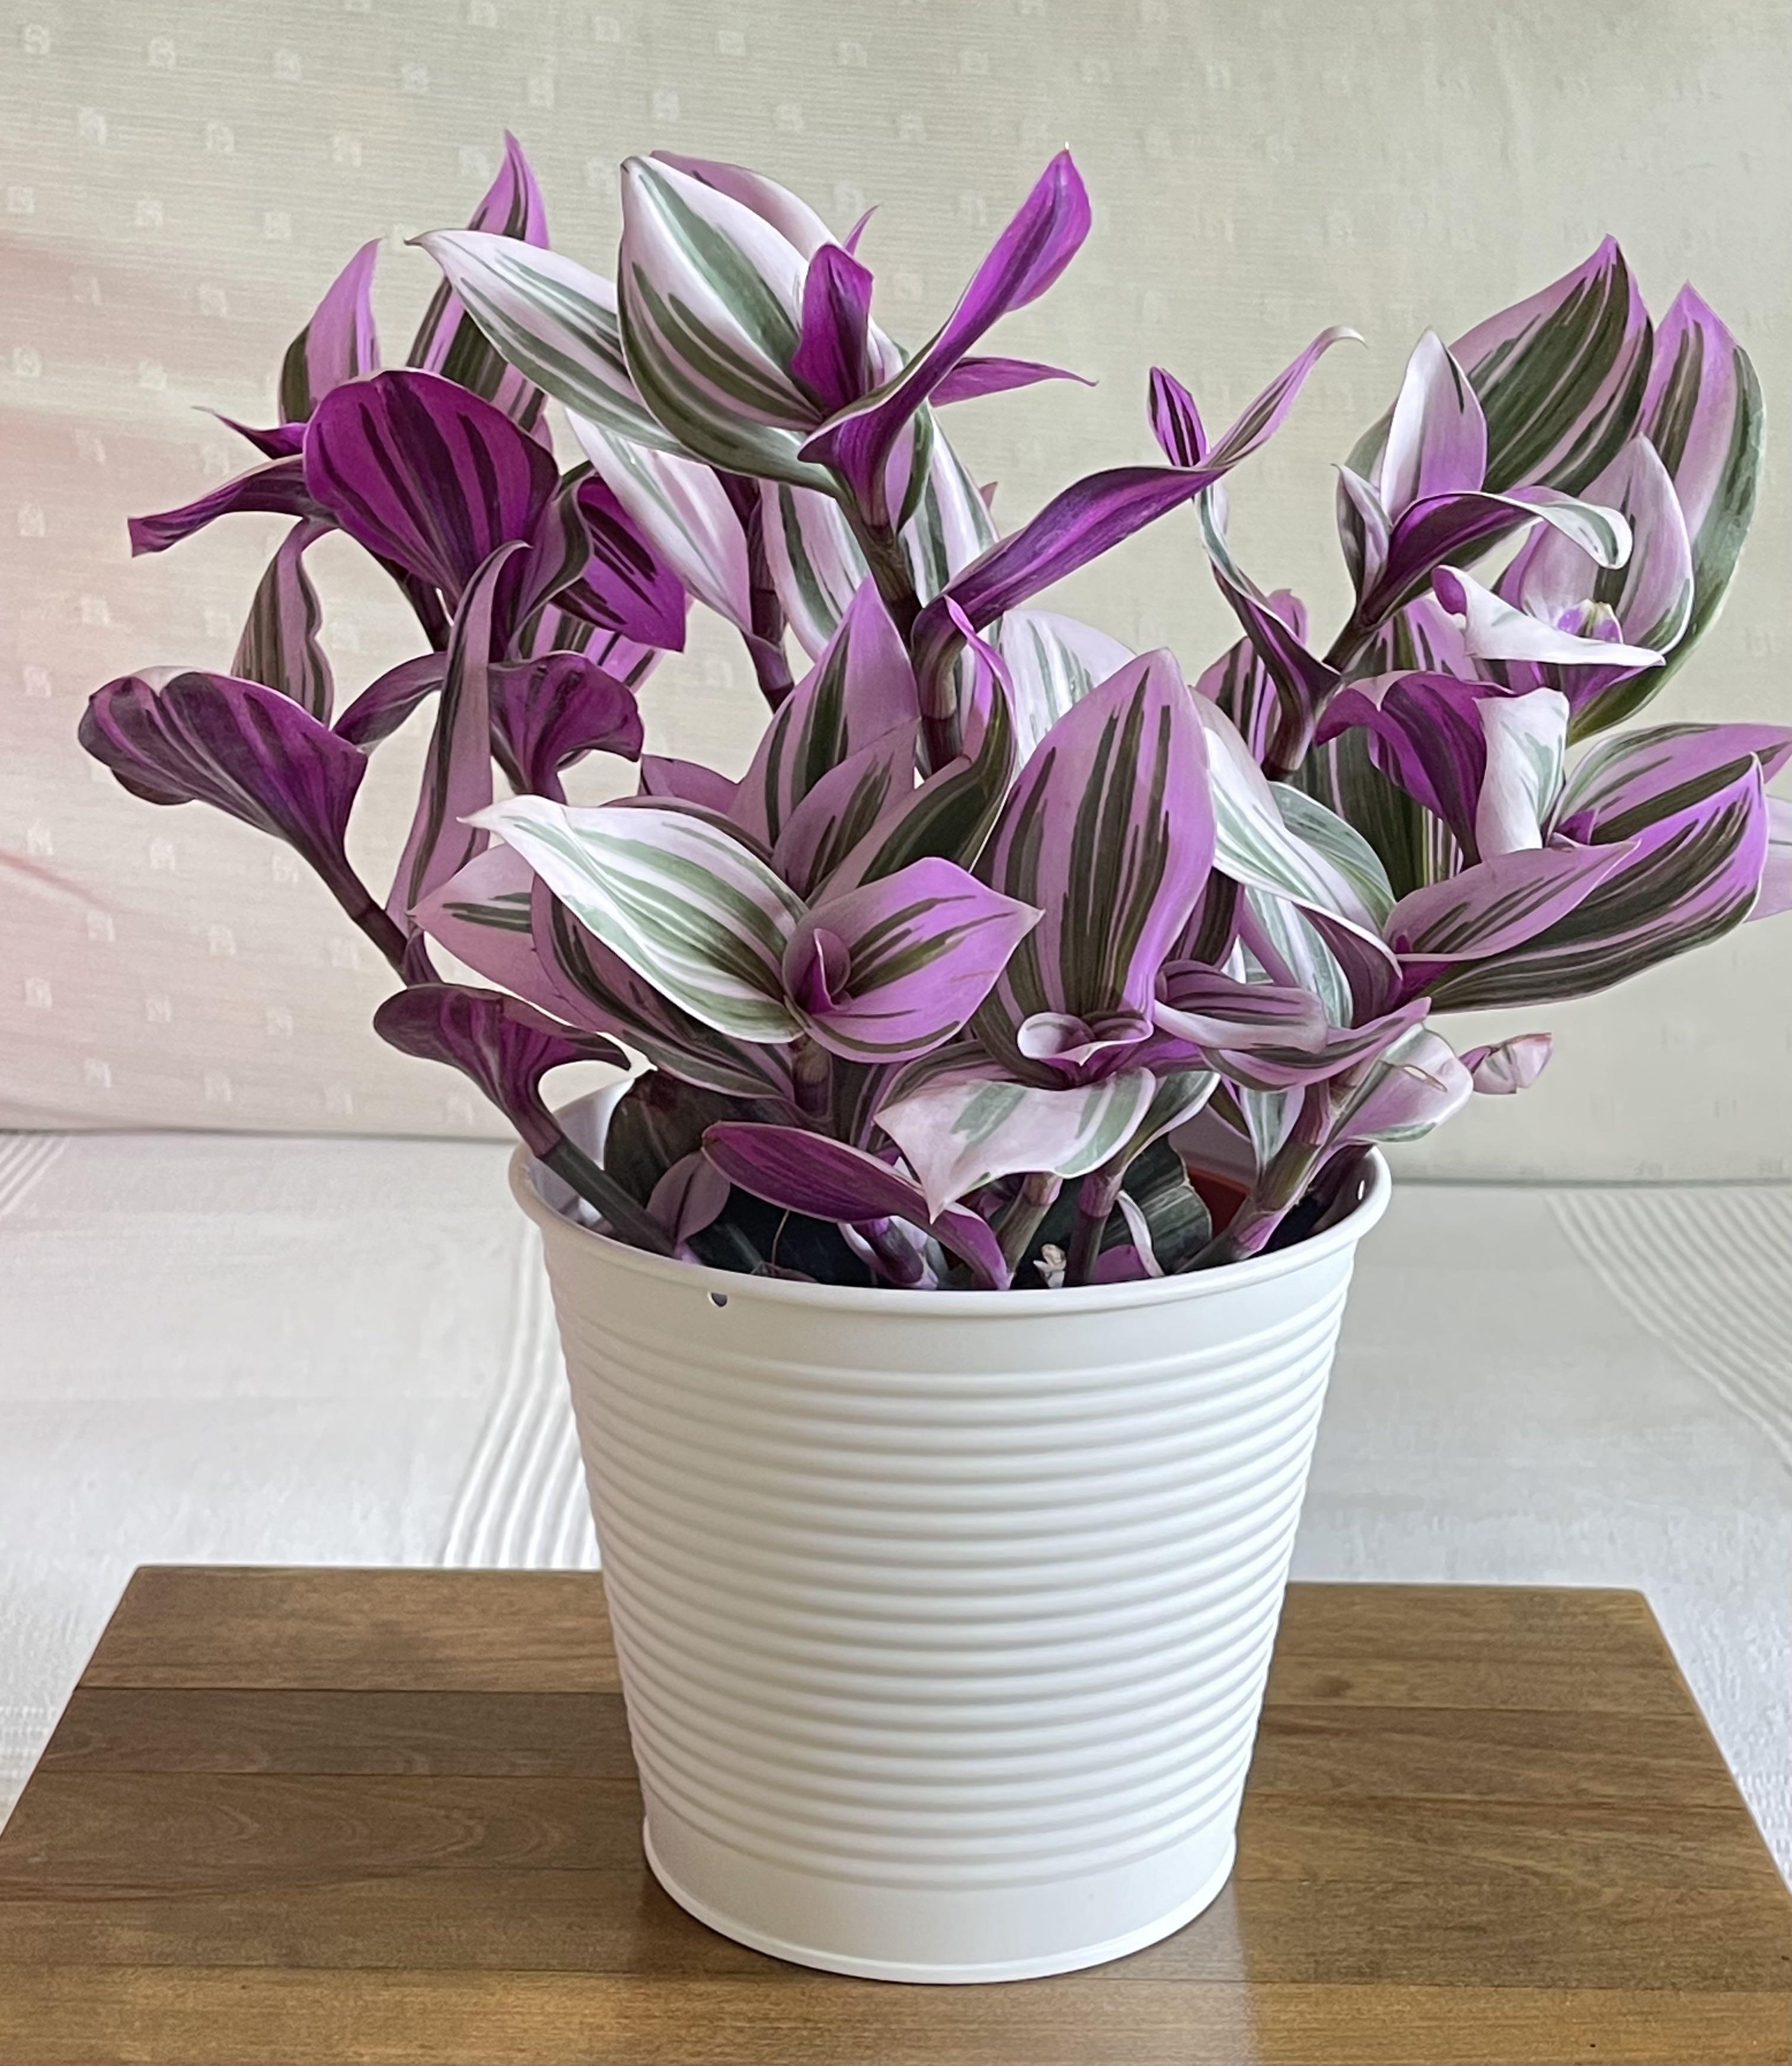 Most Colorful Houseplants You Will Love - 49